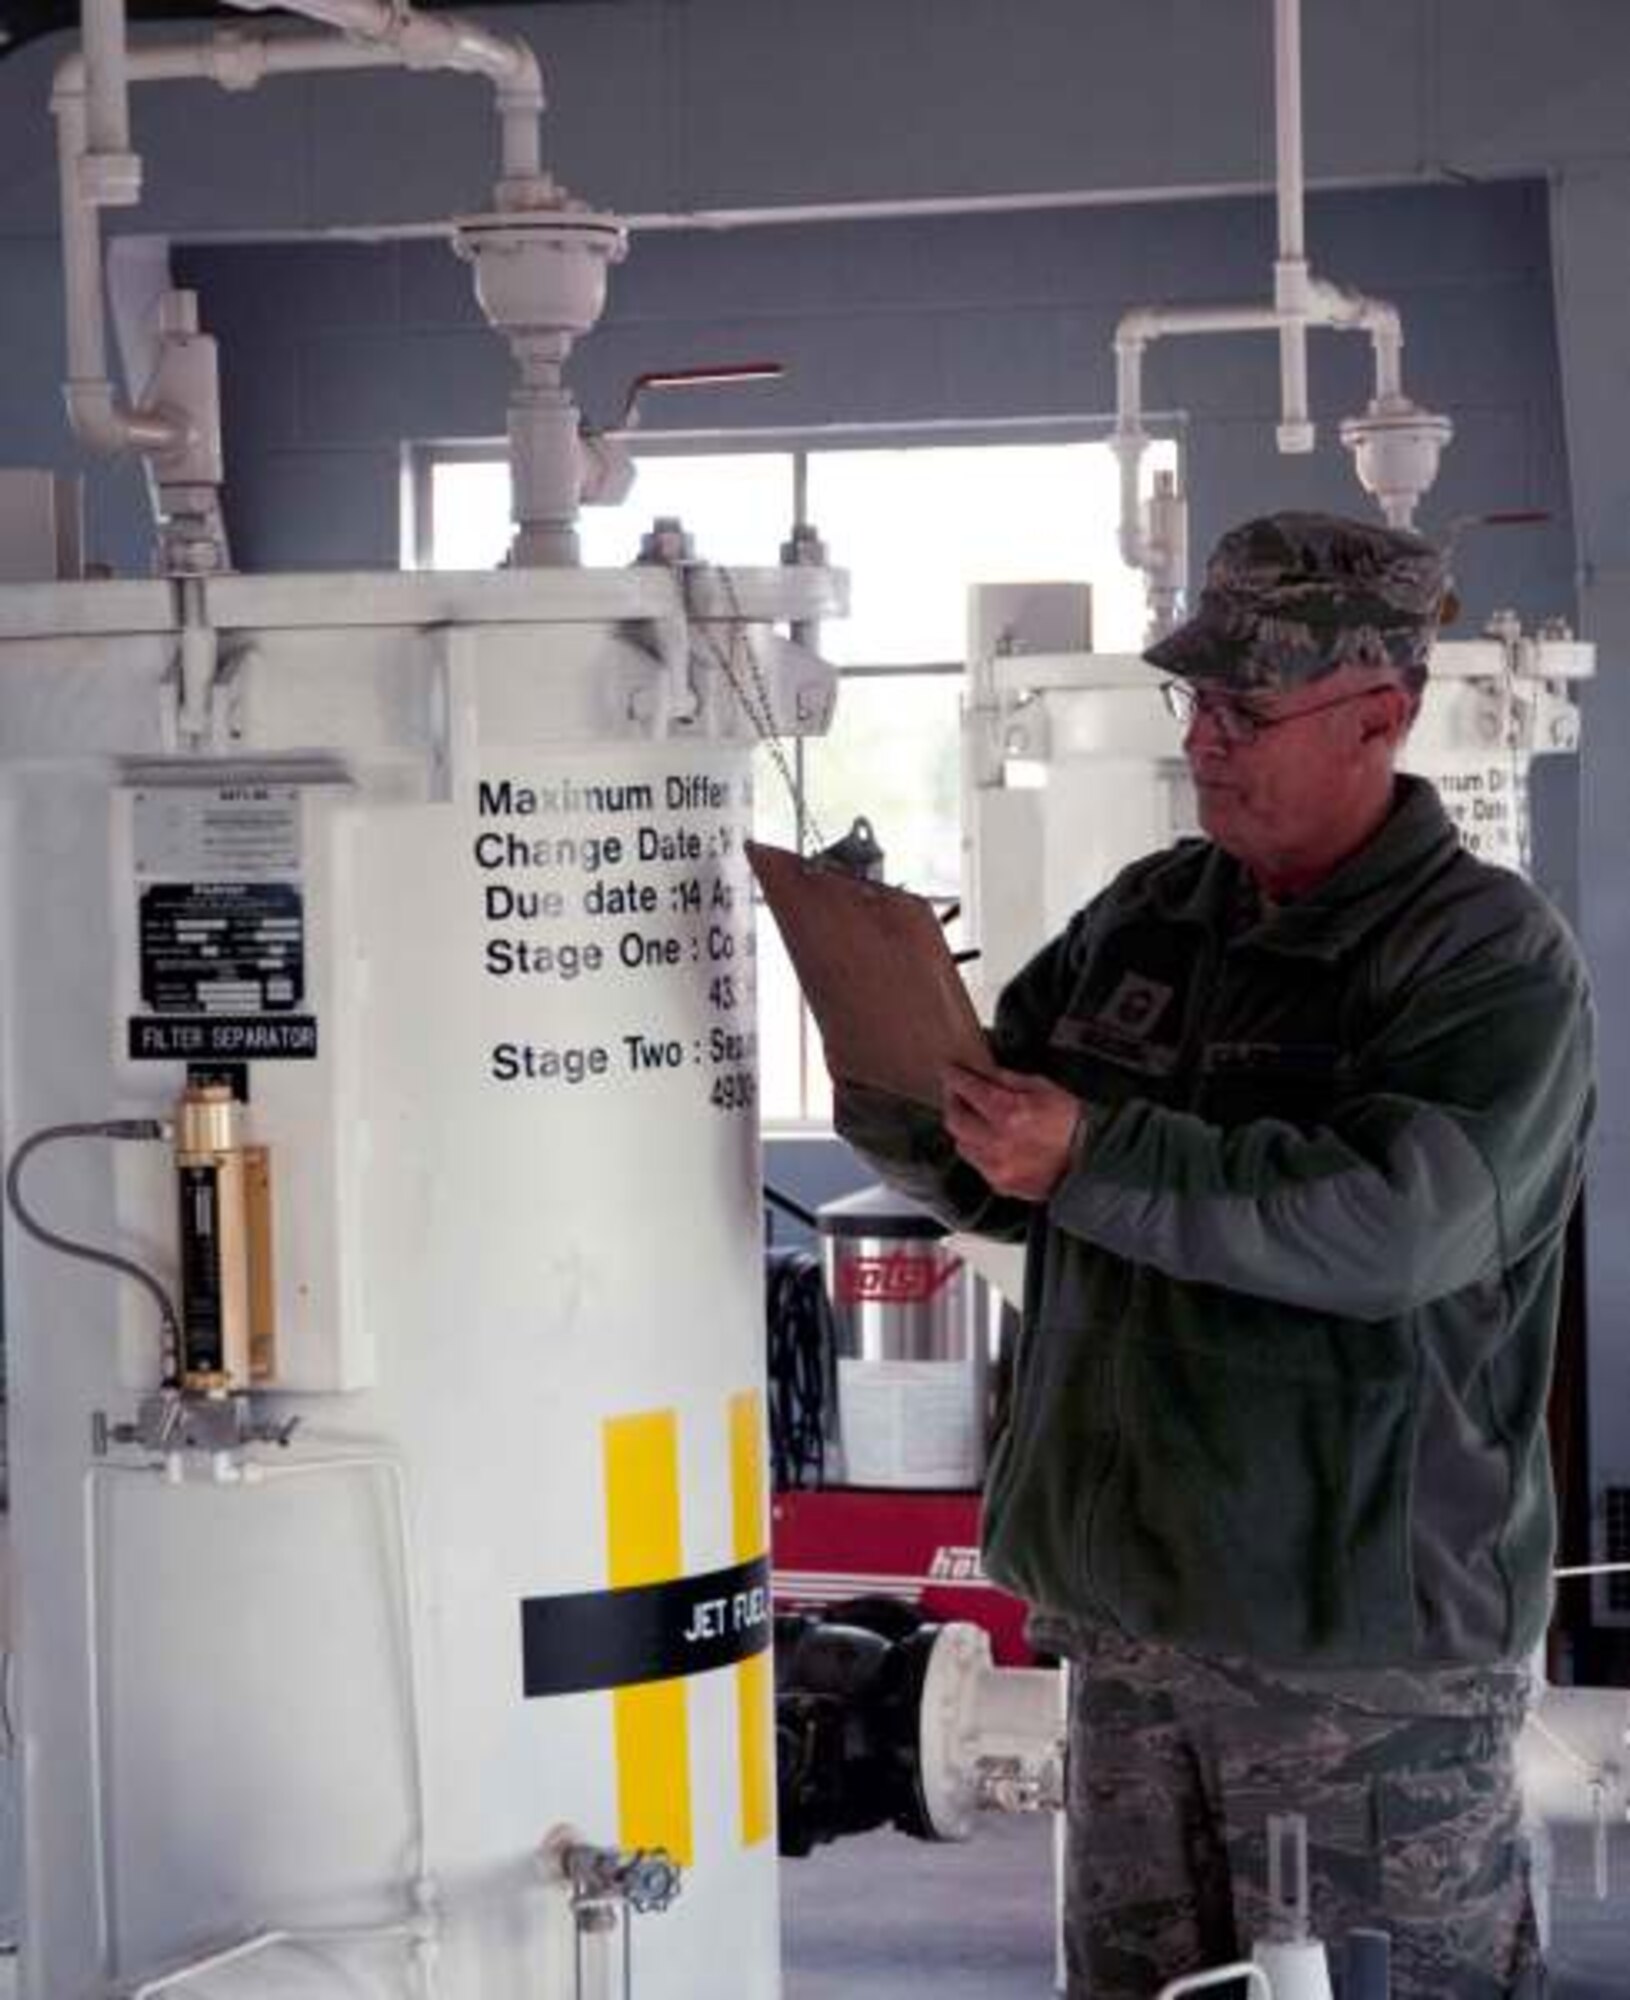 Senior Master Sgt. Cal Garlock, Fuels Superintendent, checks the separators that ensure that the jet fuel is free of contaminants, sediment, and water before it reaches the fuel trucks and the aircraft June 9. (U.S. Air Force Photo by Tech. Sgt. Heather Walsh)